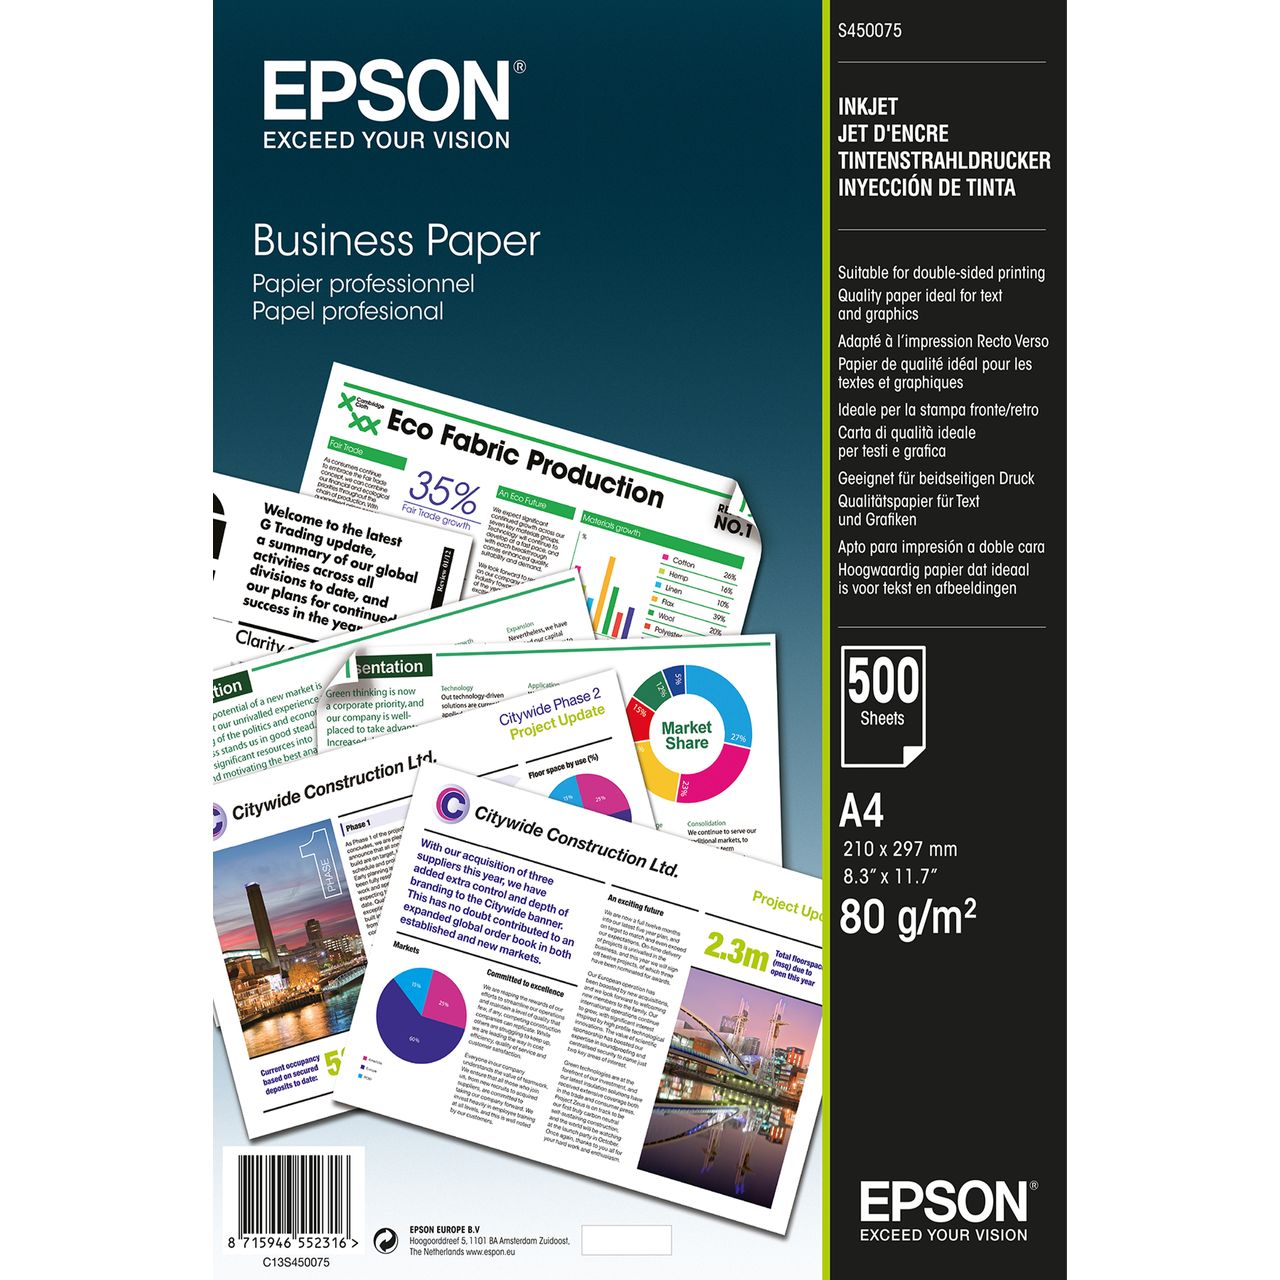 Epson Business Paper Review